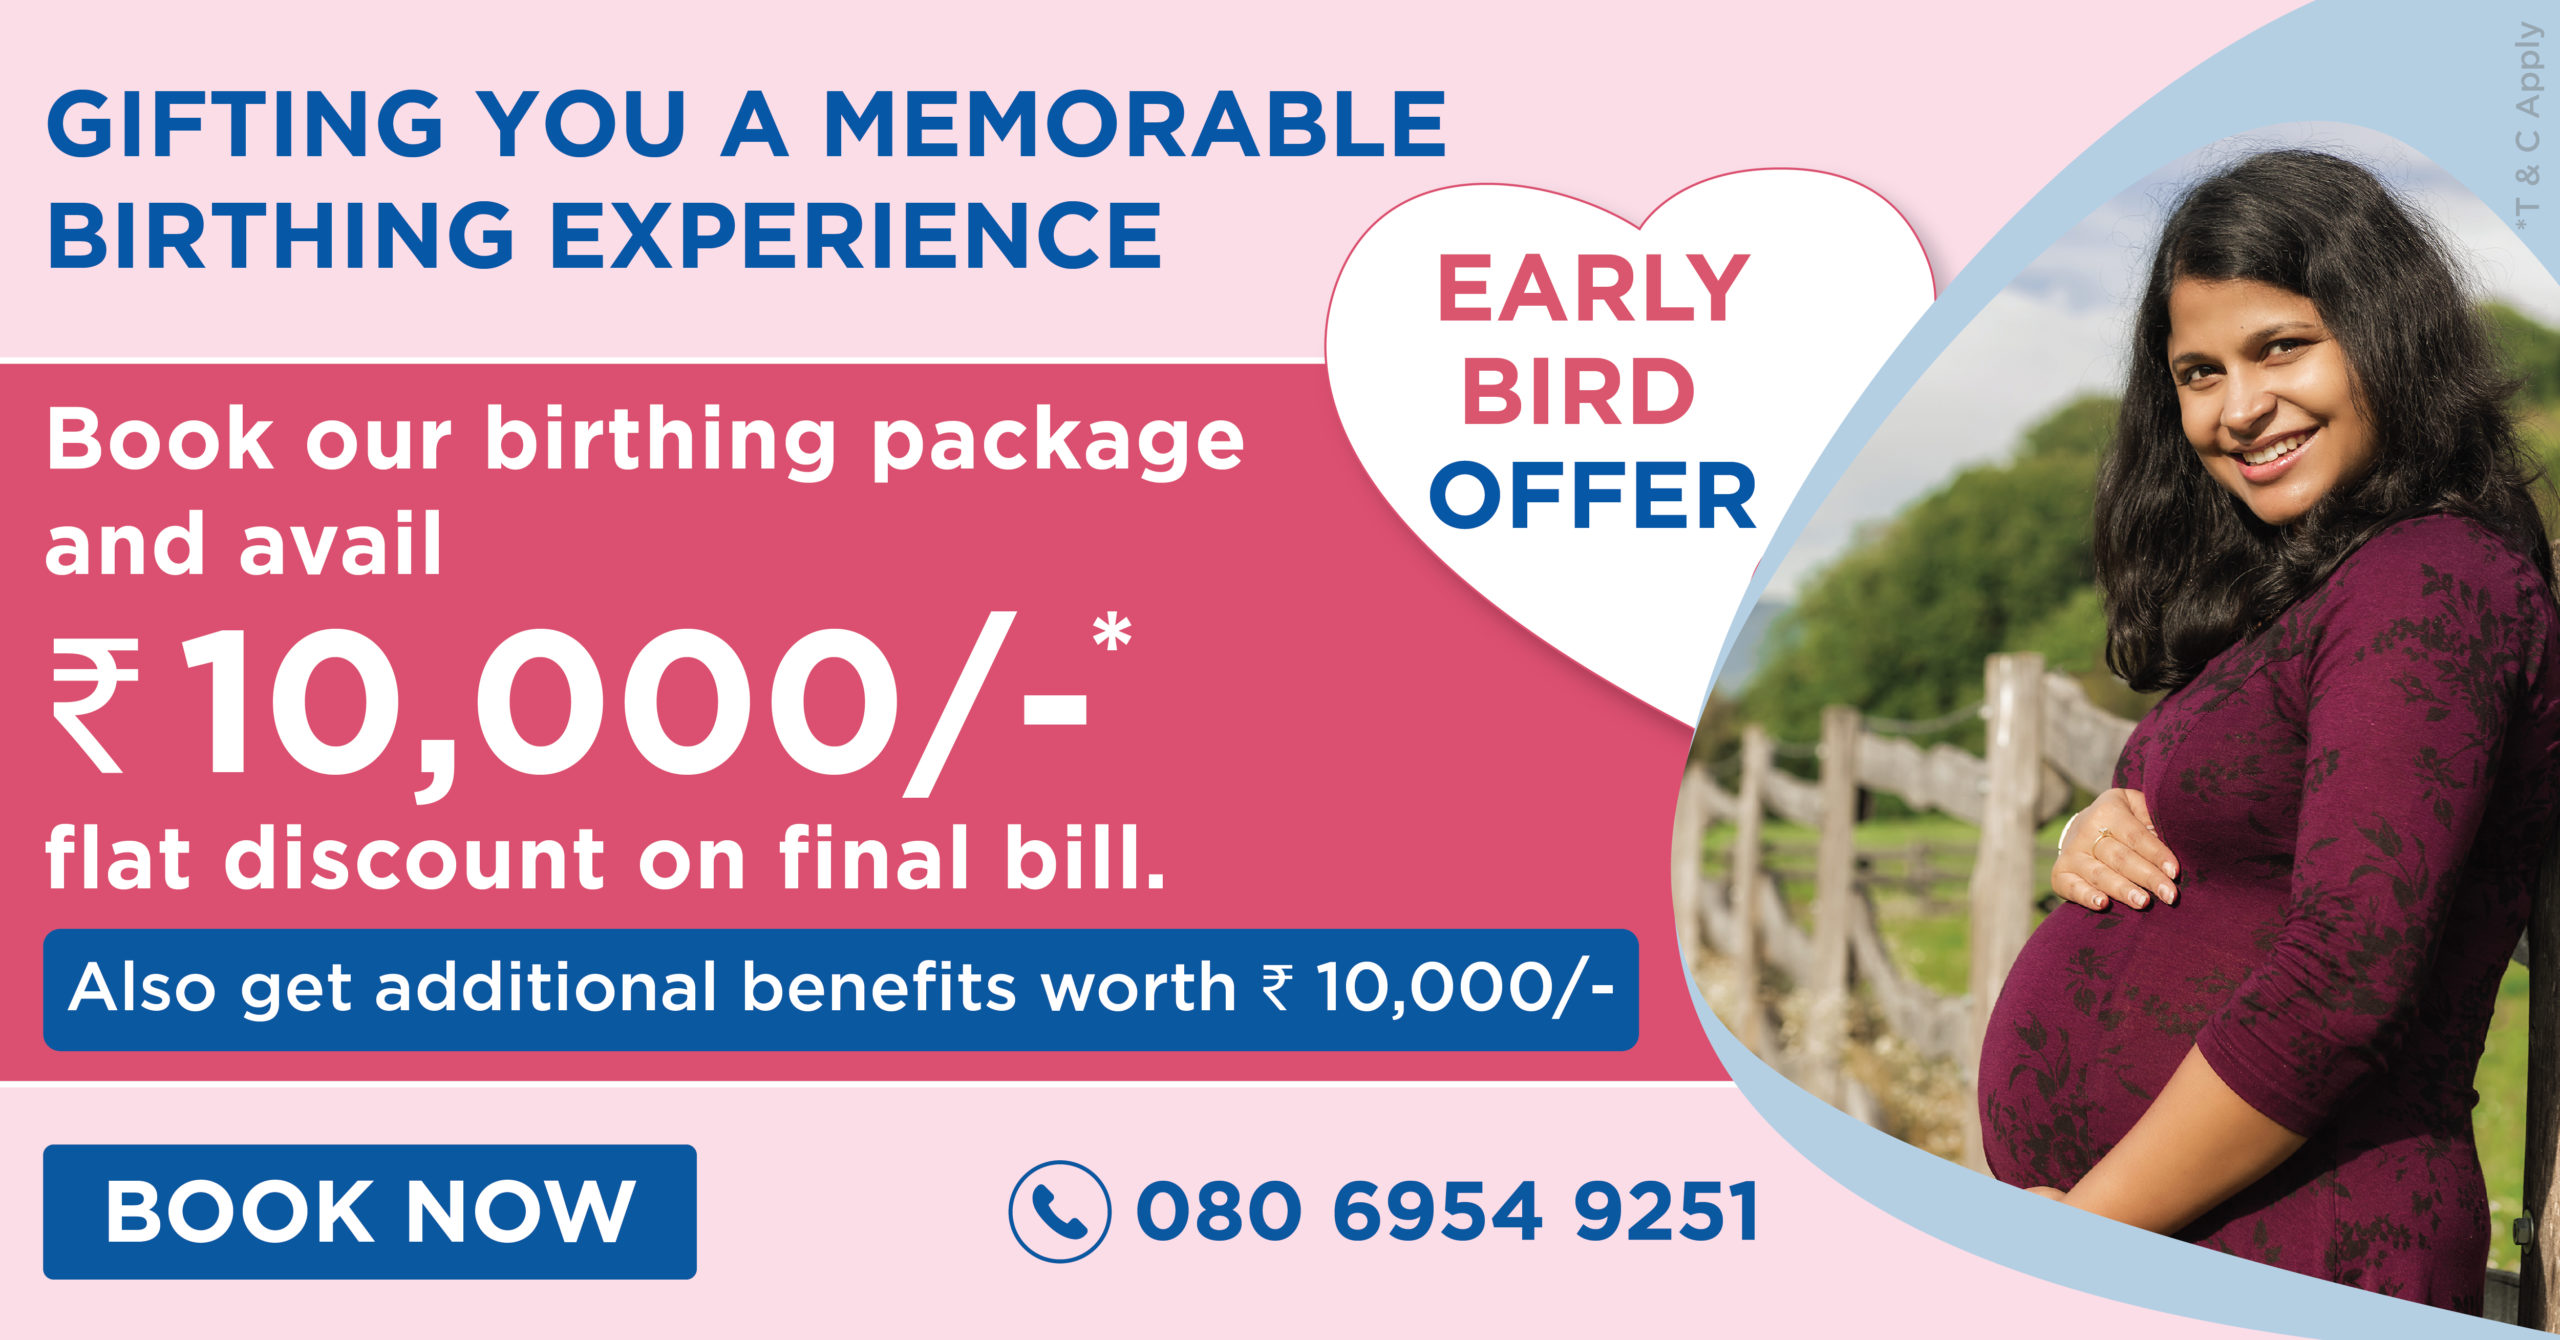 MH_Chennai_Early Bird Offer_Landing Page_1200x628 px